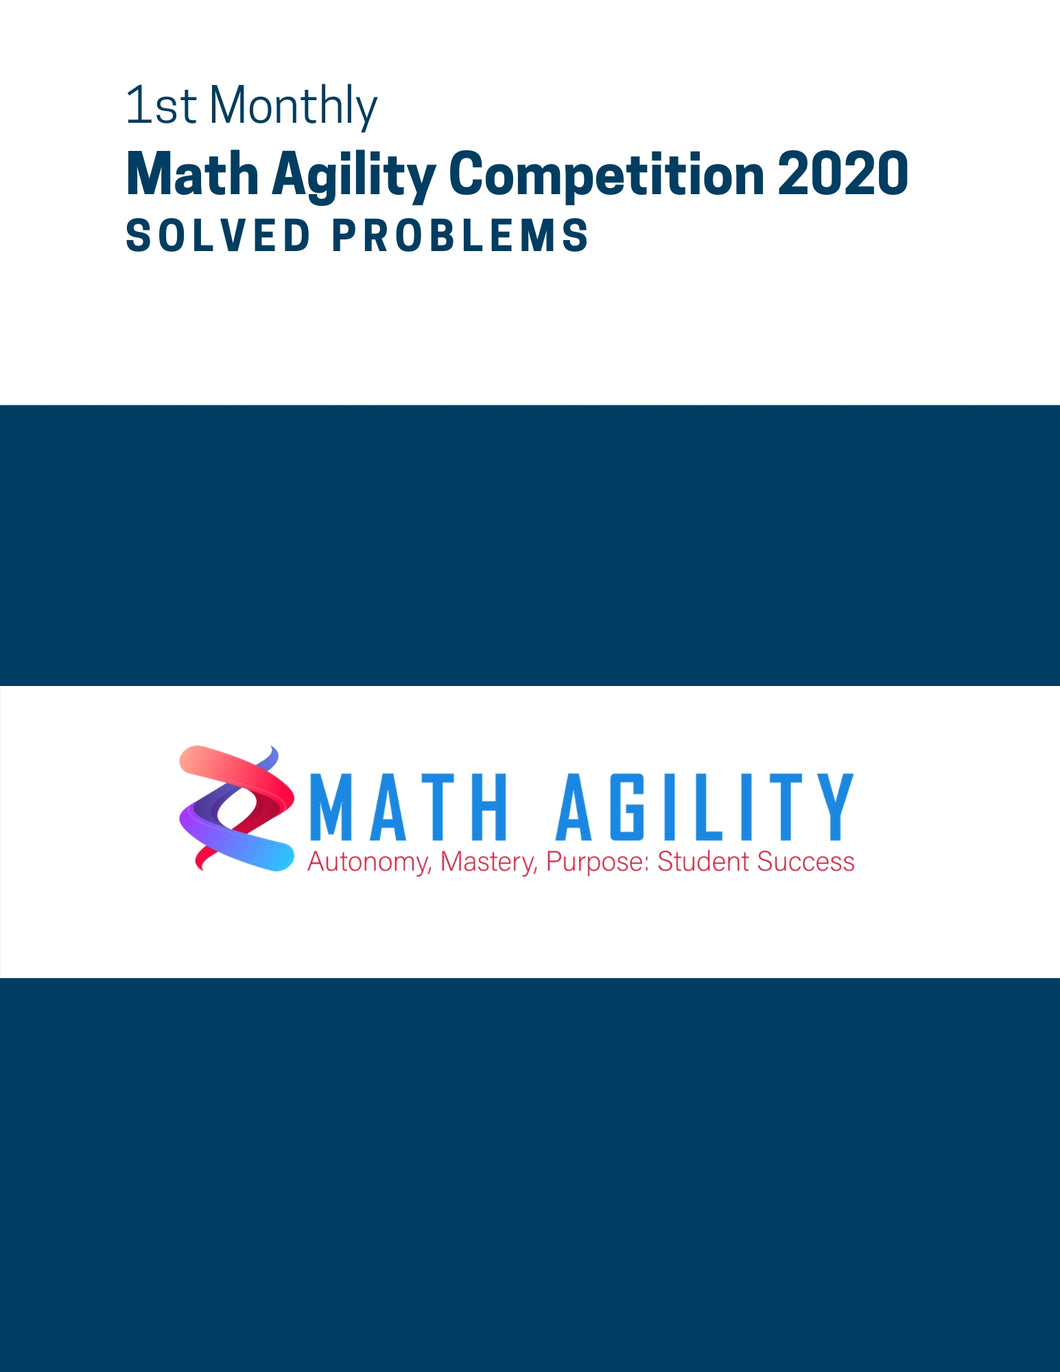 1st Math Agility Competition 2020 Solved Problems